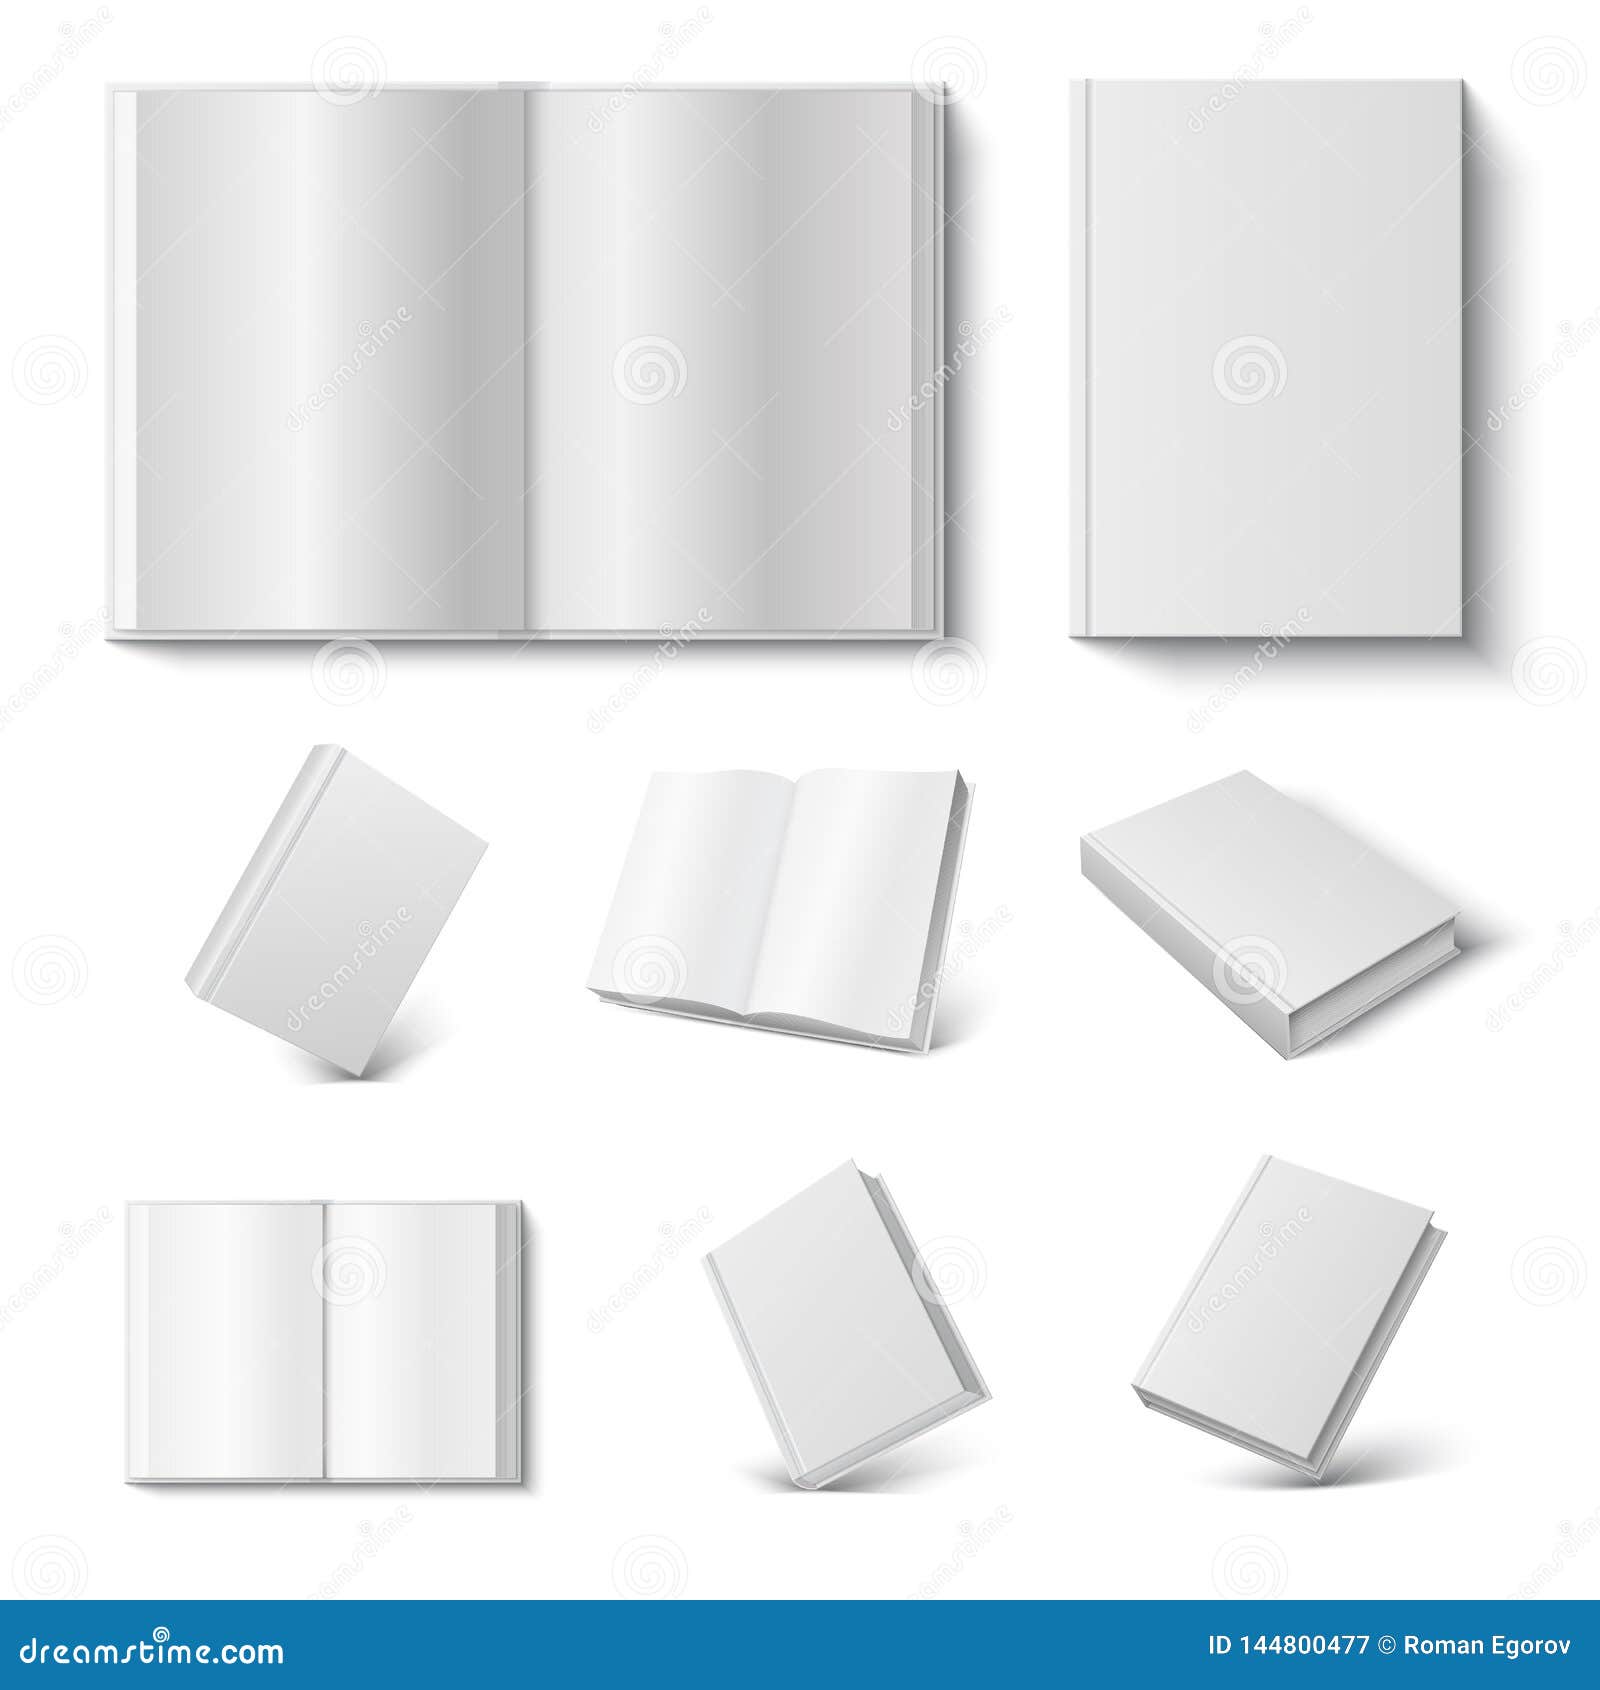 realistic book. 3d mock up open and closed diary with blank hard cover on white background.   set